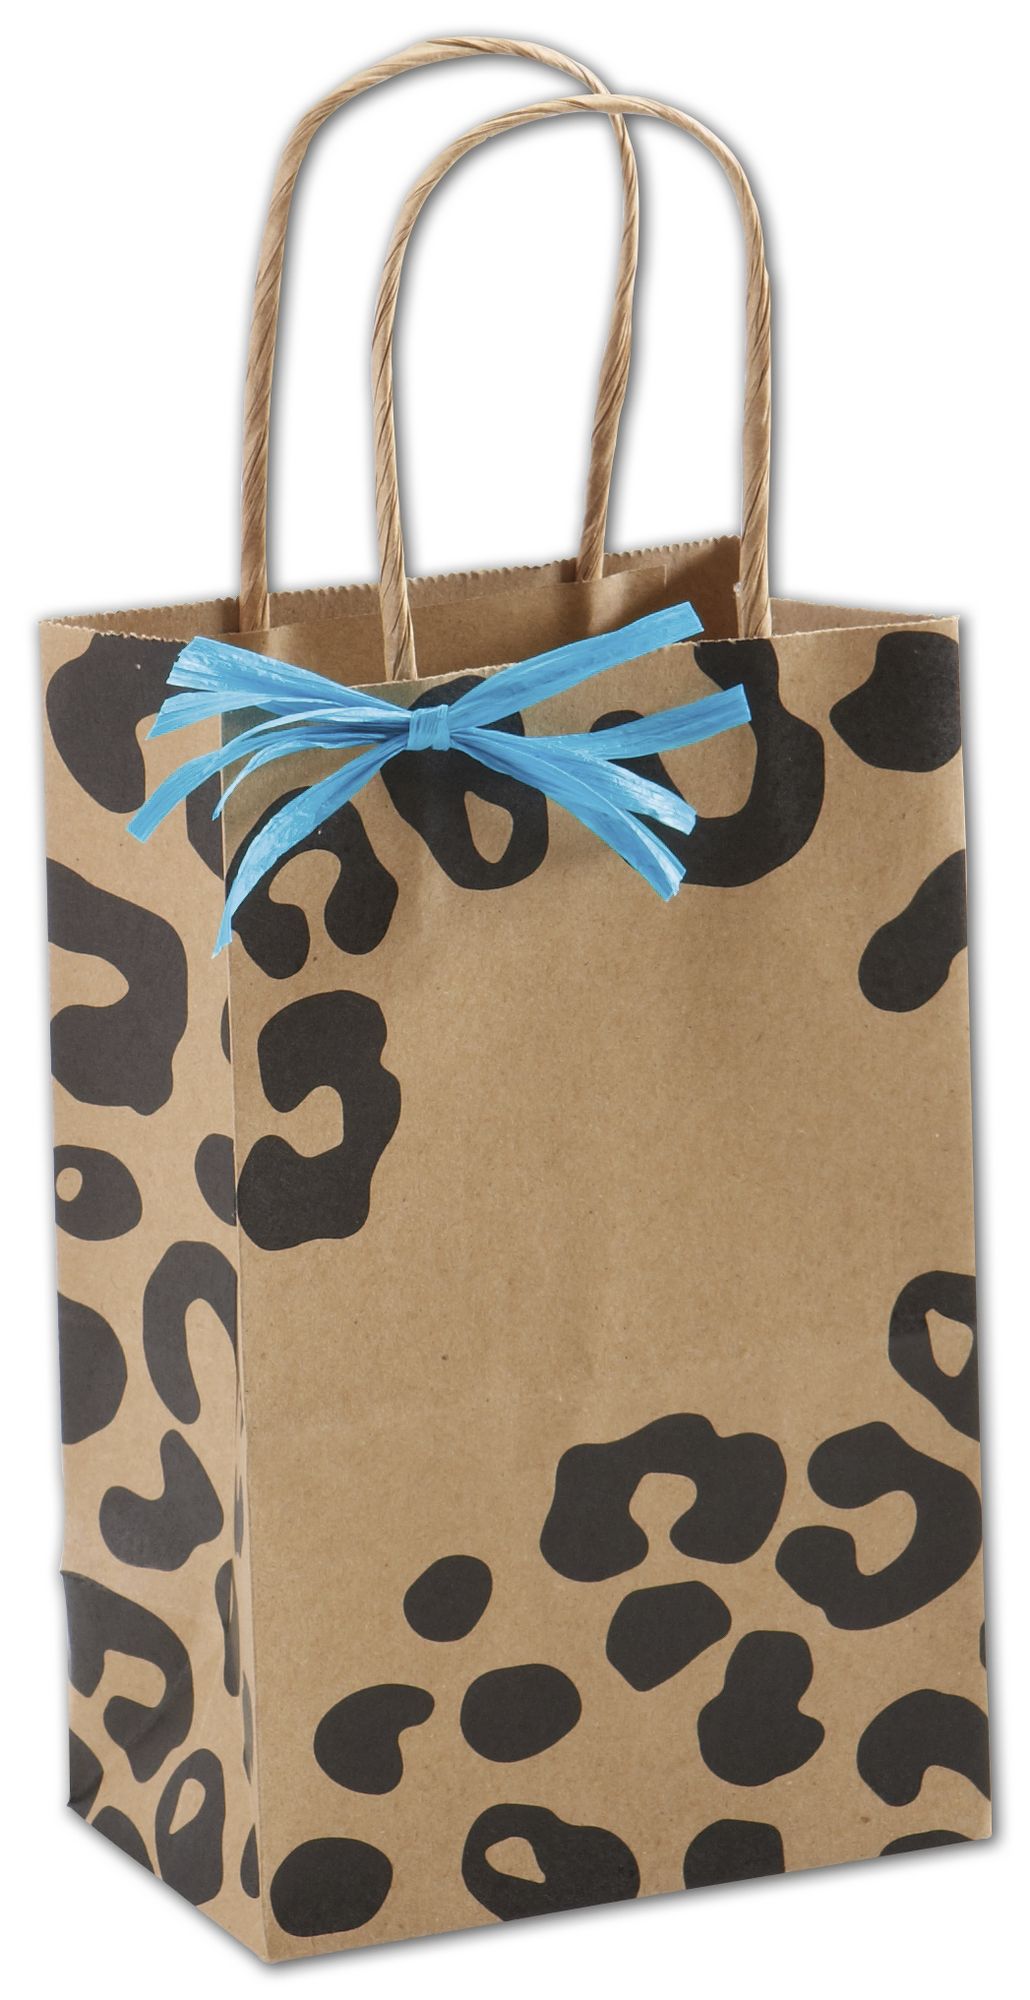 These sturdy kraft bags with a bold black cheetah print package your purchases or gifts stylishly.